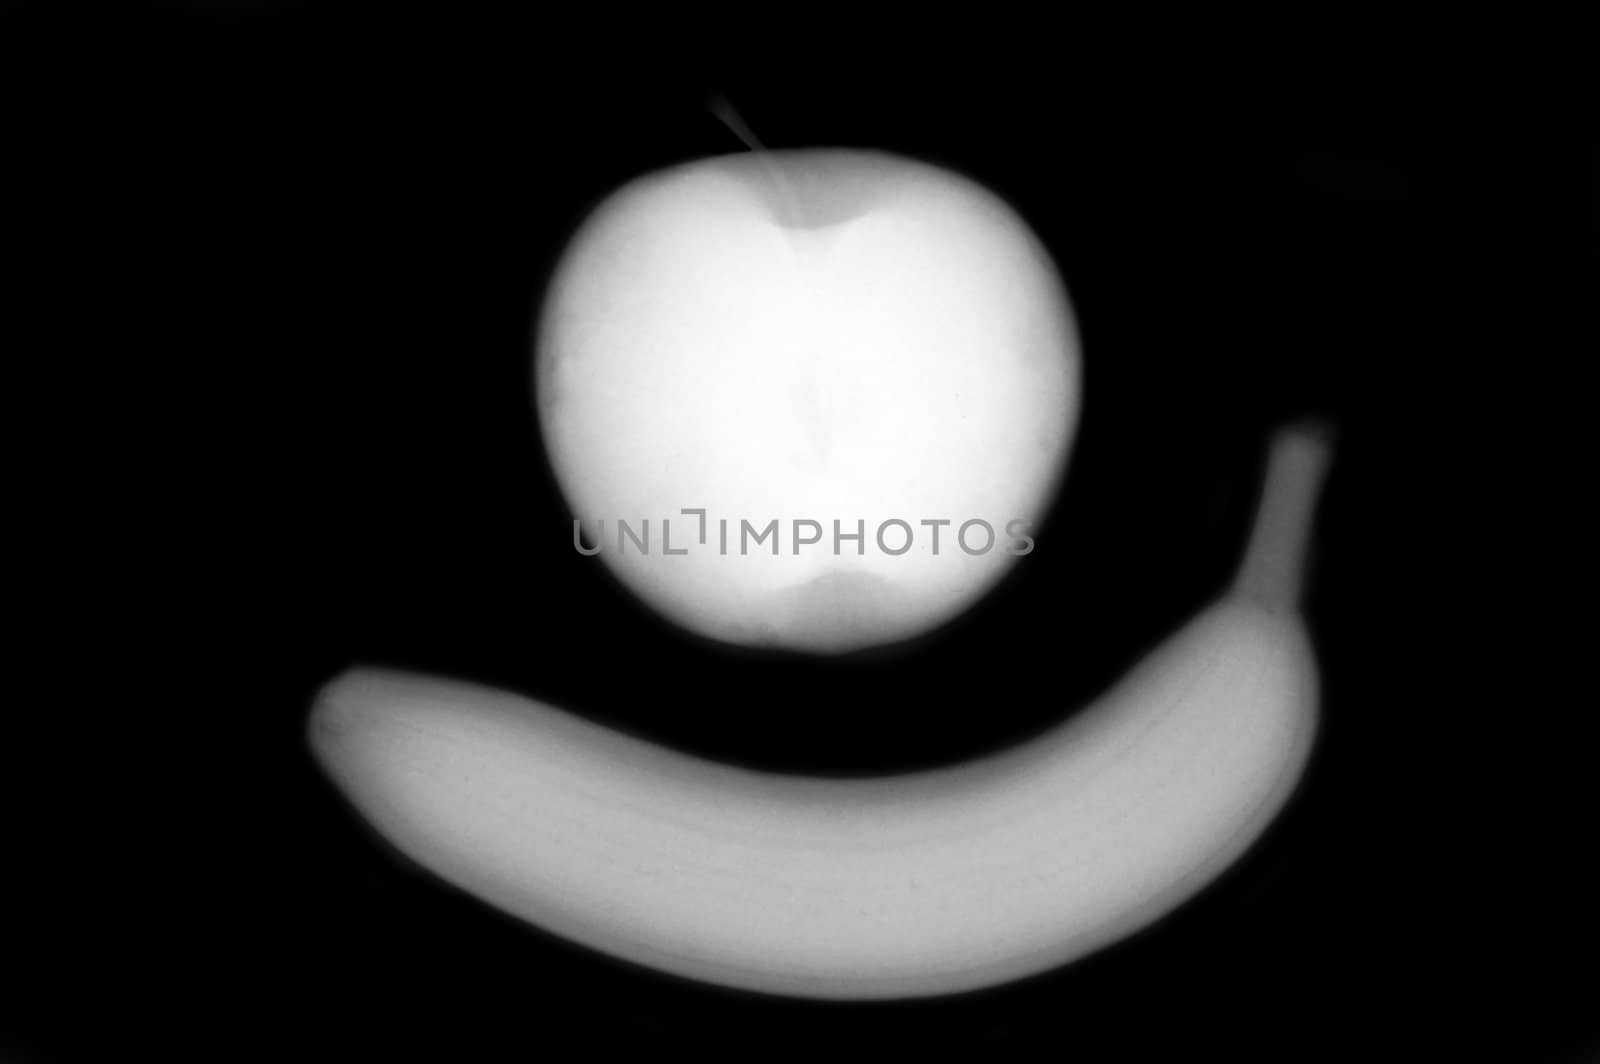 An apple and banana are scanned by X-ray